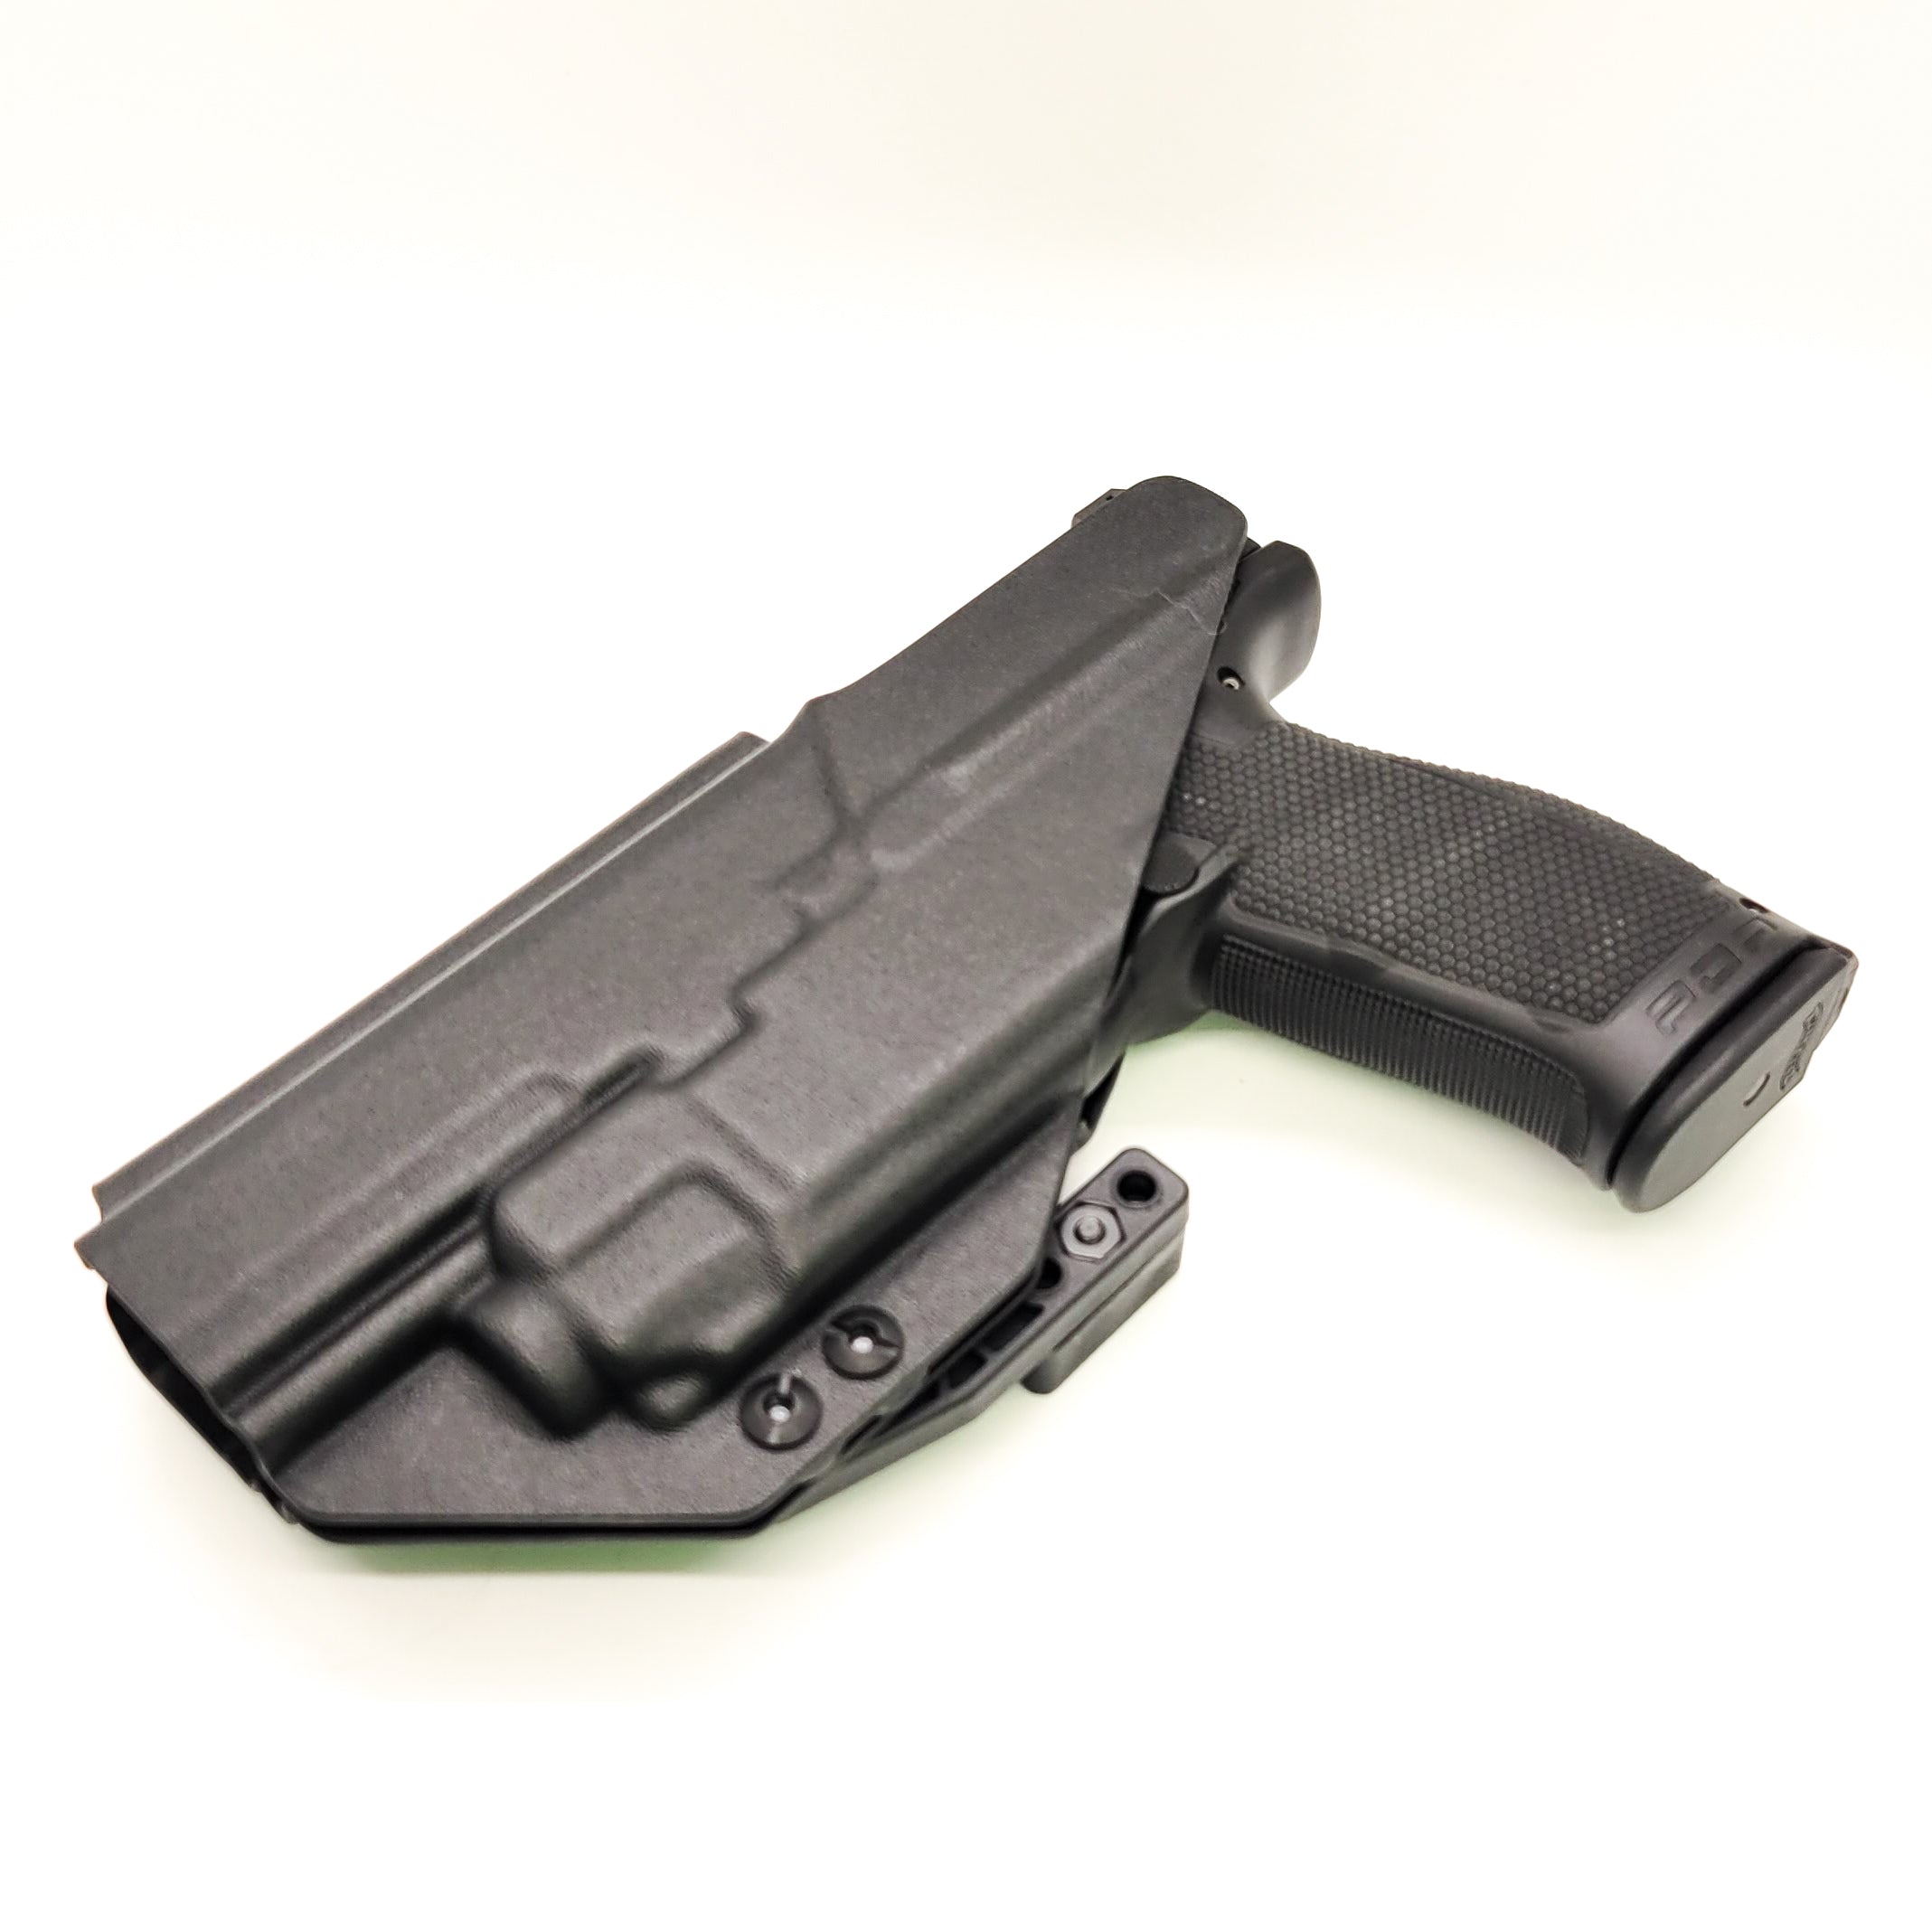 For the best concealed carry Inside Waistband IWB AIWB Holster designed to fit the Walther PDP Pro SD 4.5" pistol with Streamlight TLR-8 on the firearm, shop Four Brothers Holsters. Cut for red dot sight, full sweat guard, adjustable retention & open muzzle for threaded barrels & compensators. TLR8 ProSD